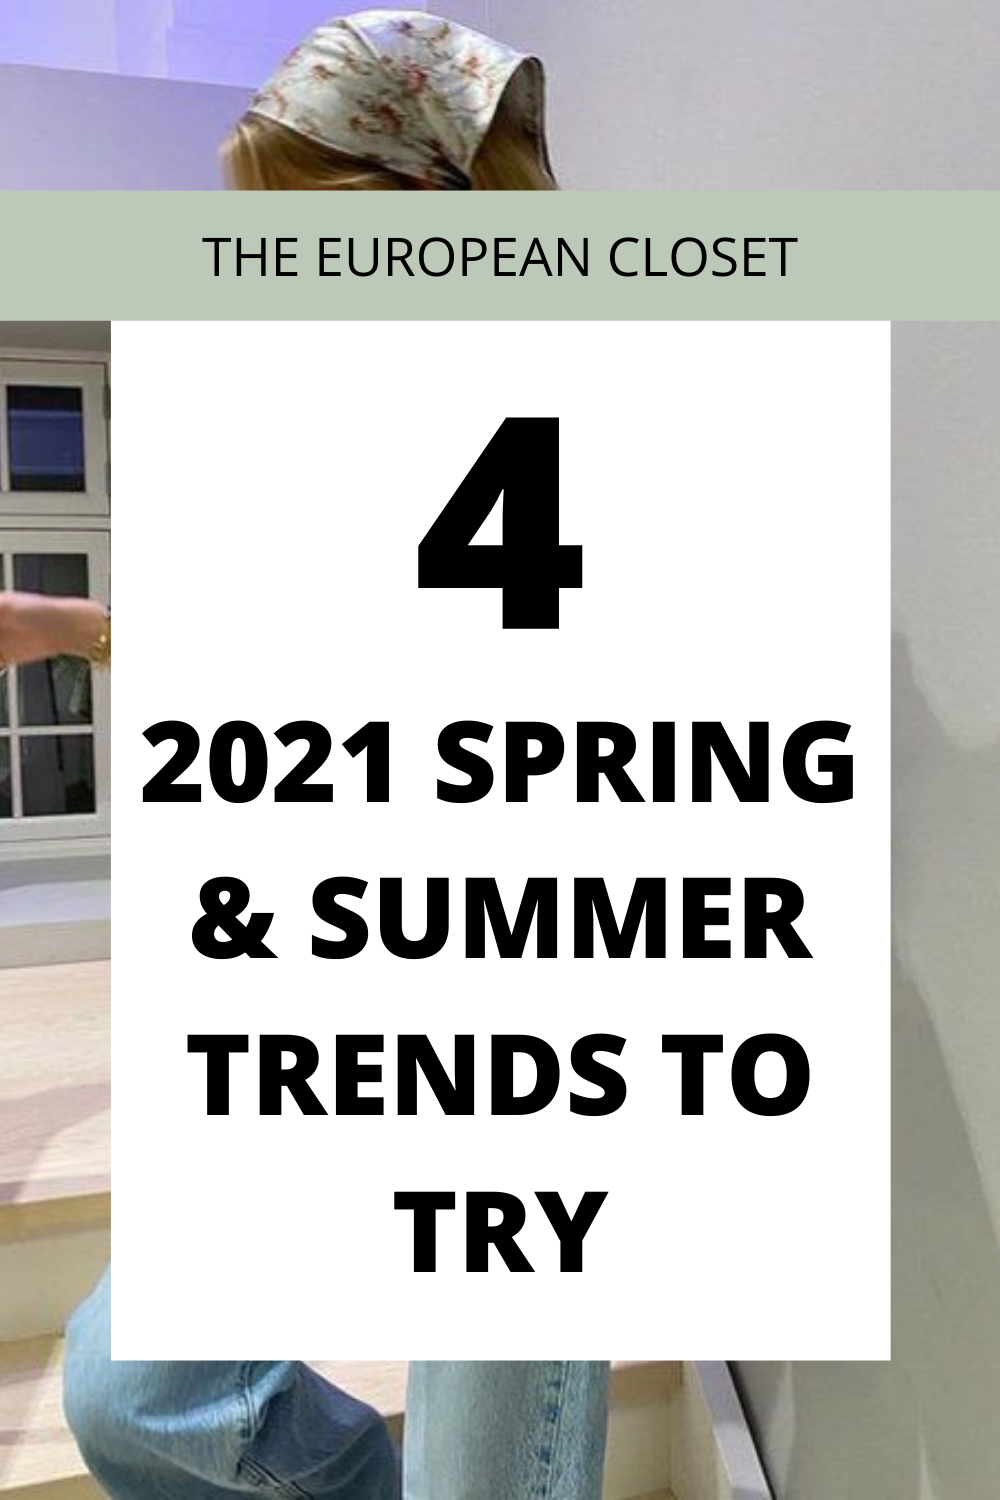 Want to find out what the biggest Spring fashion trends are? This article covers the 4 biggest trends this Spring.